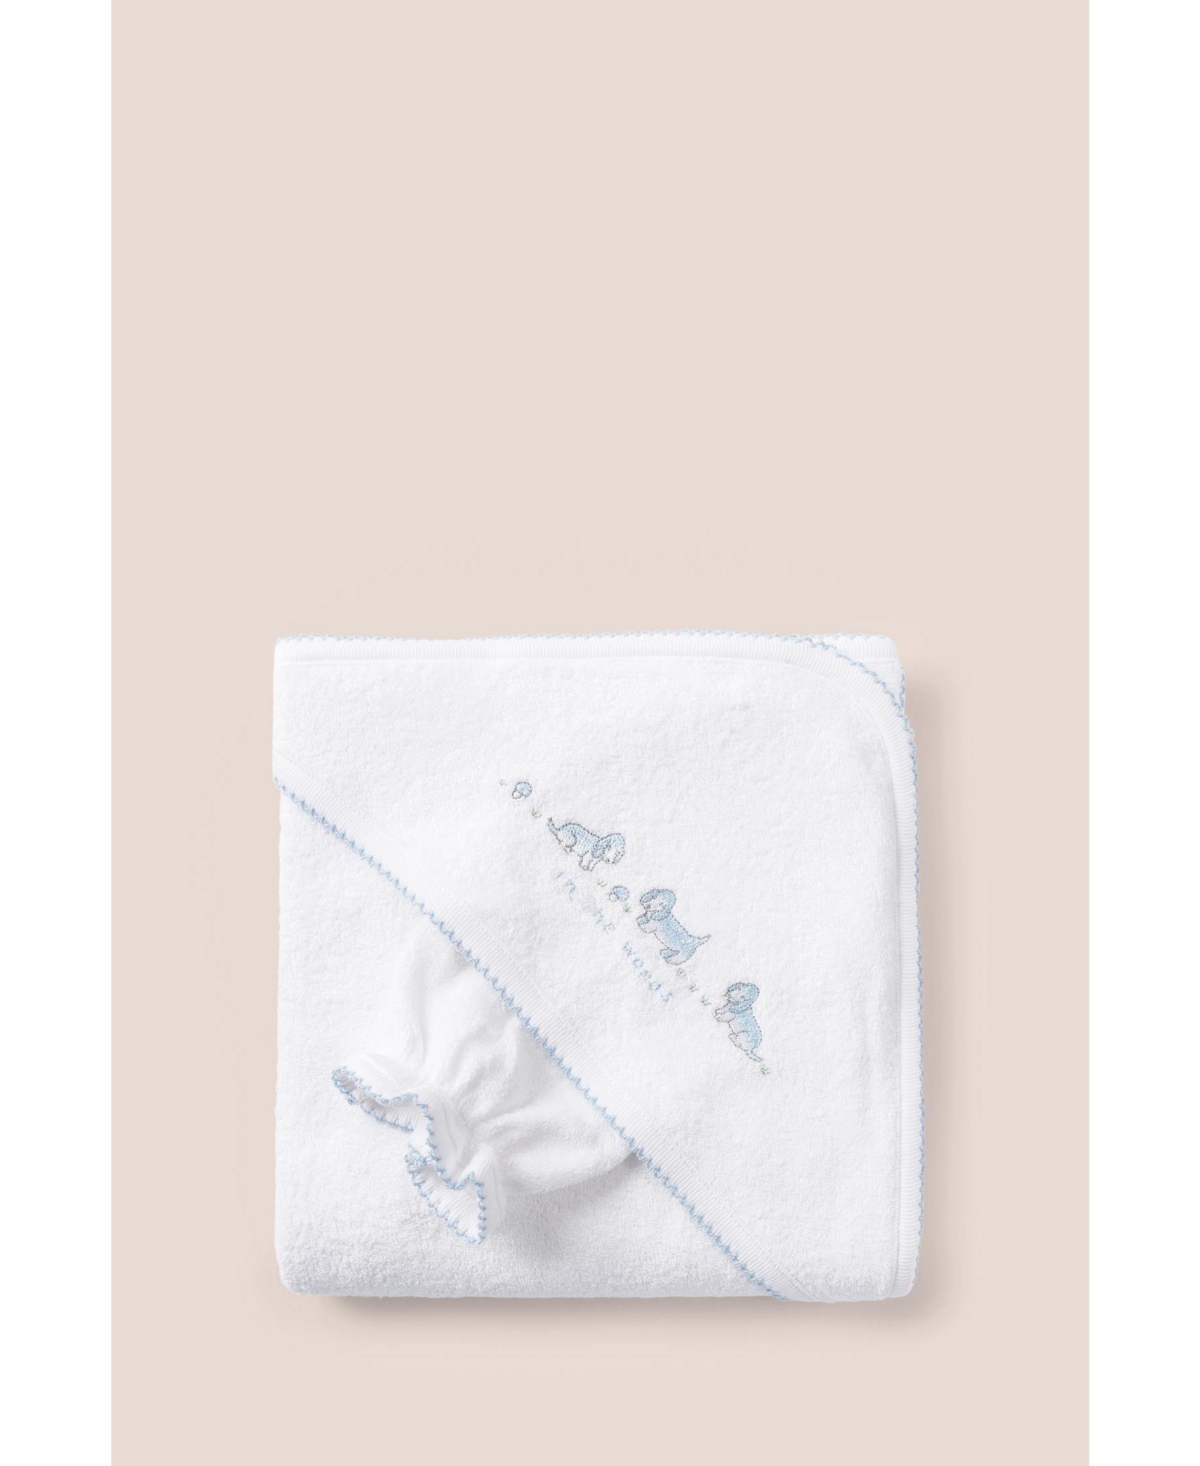 Babycottons In The Woods Softest Towel & Mitten Made Of Premium Peruvian Pima Cotton For Infants In Light Pastel Blue